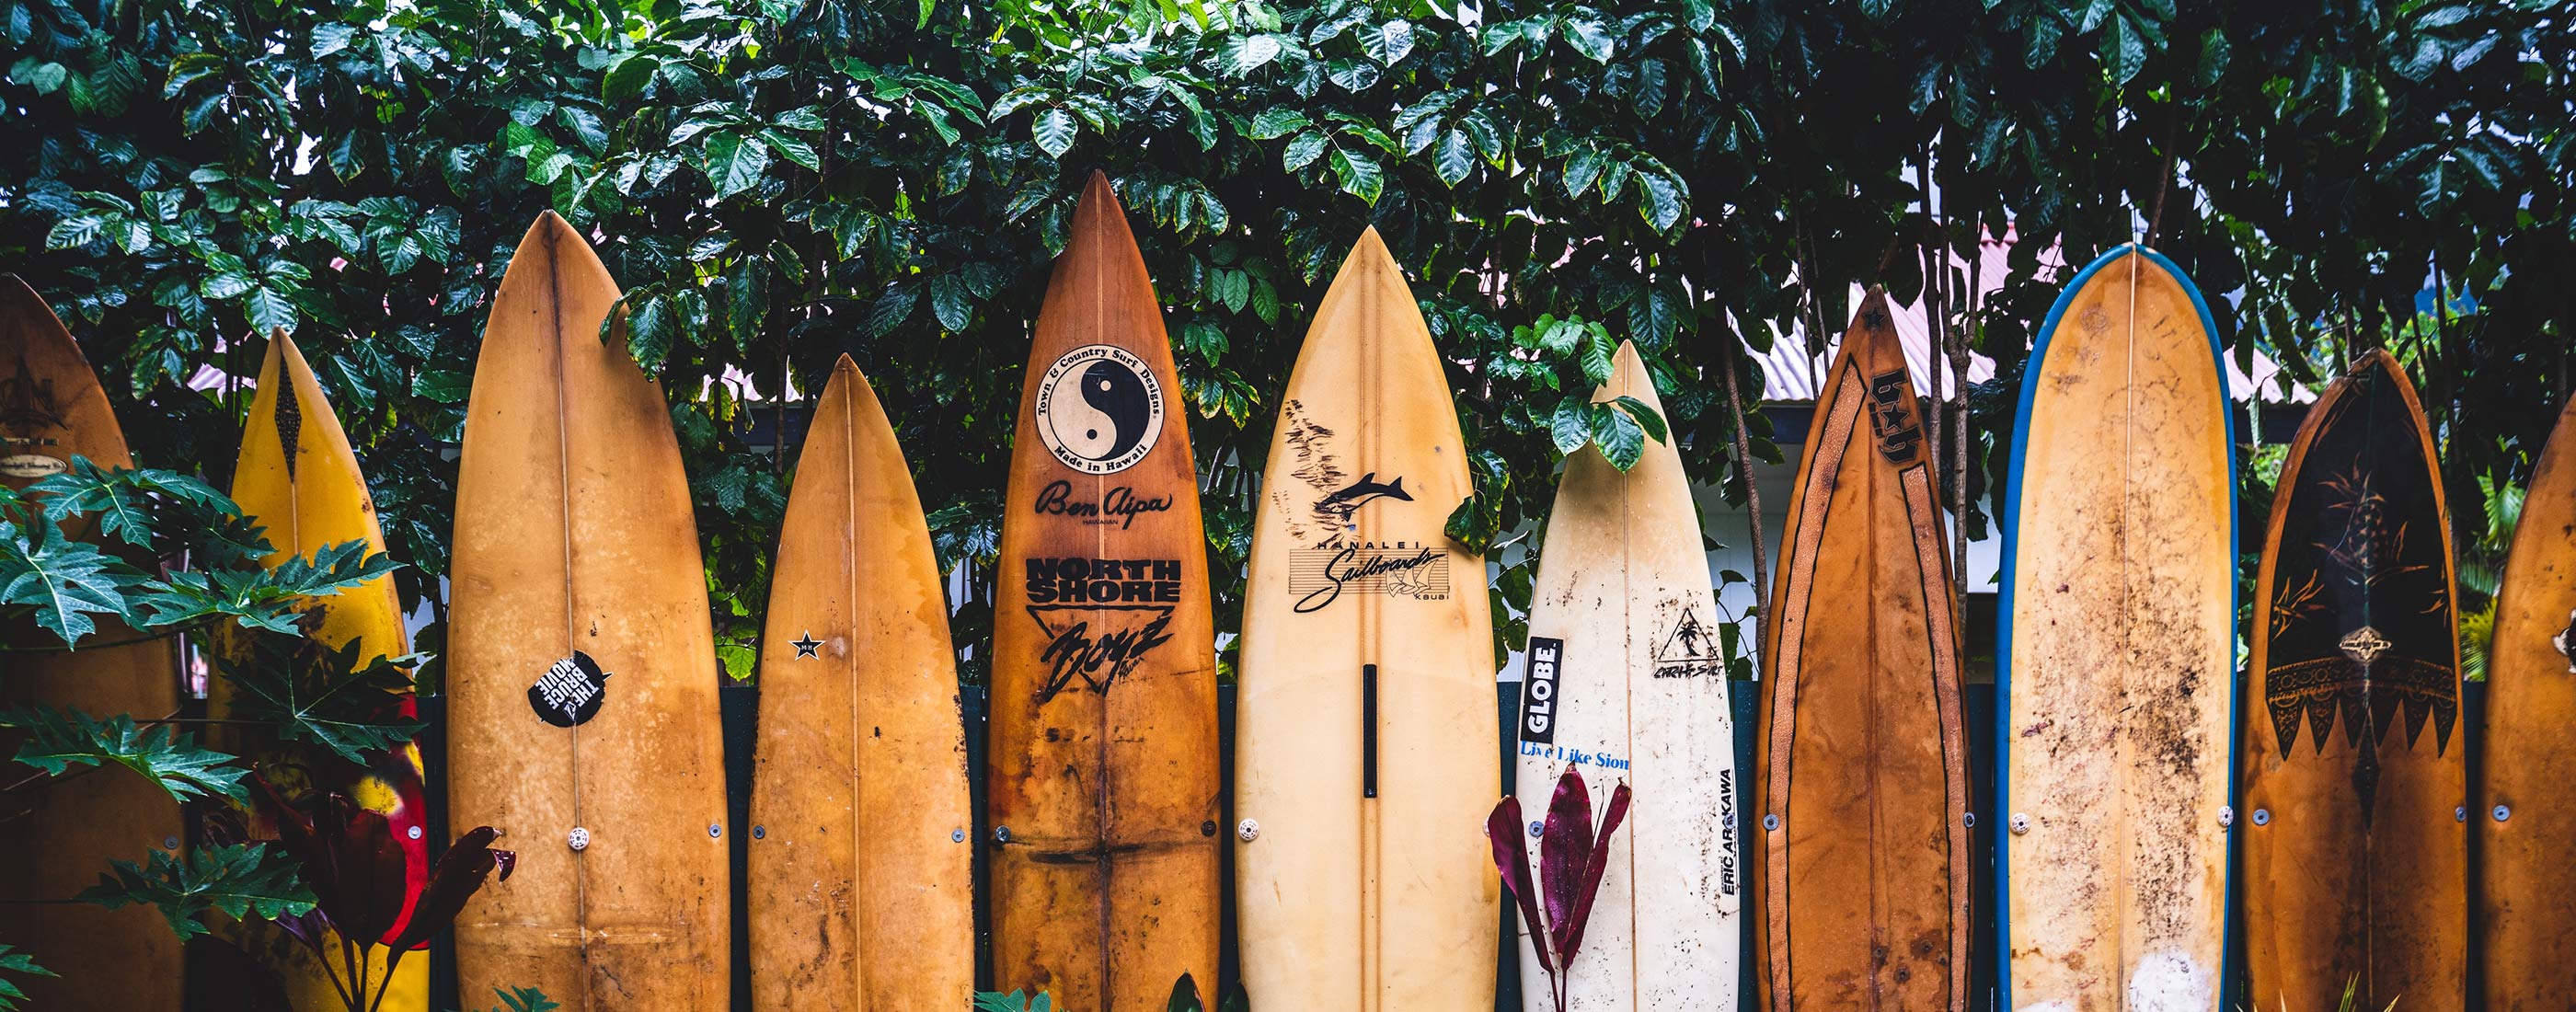 Surfboards lined up along a fence